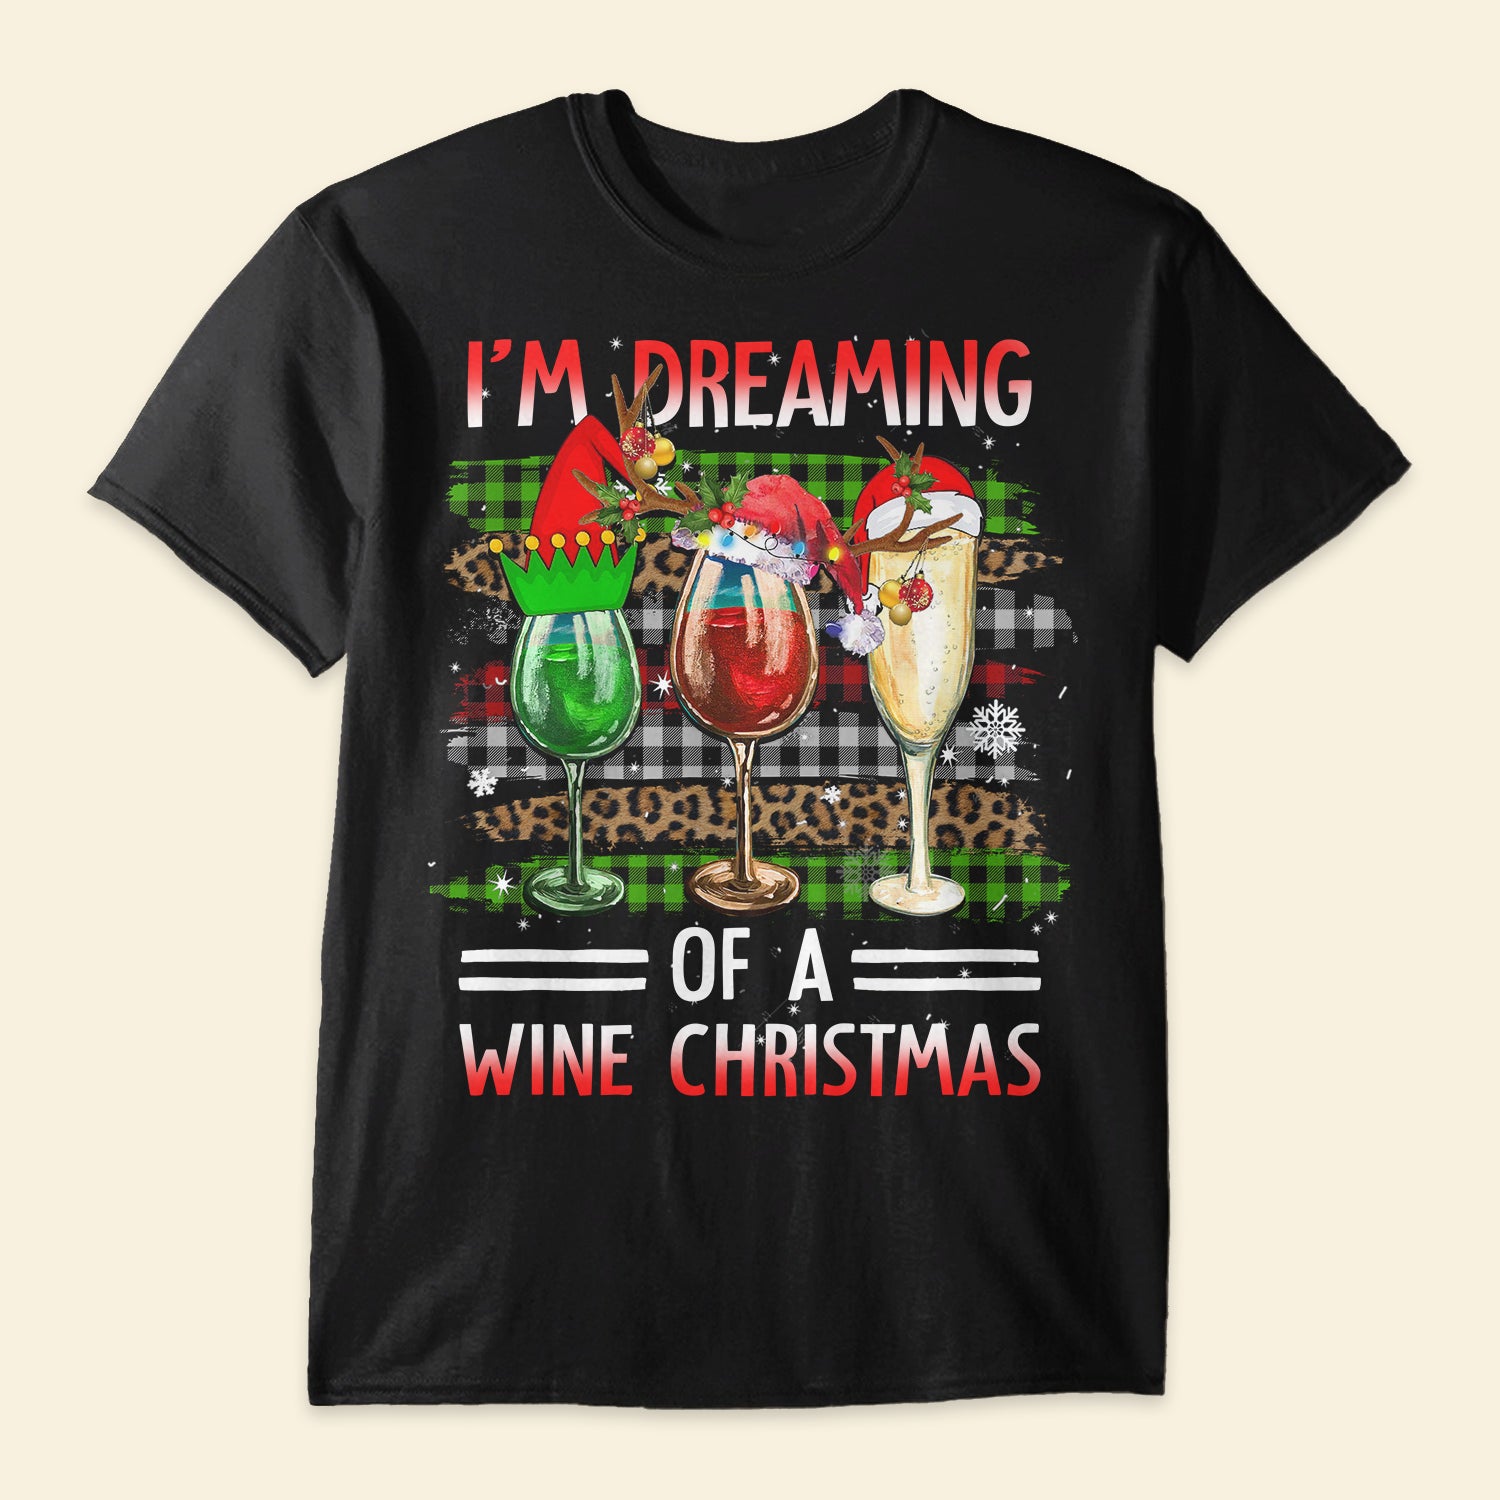 Dreaming Of A Wine Christmas - Shirt